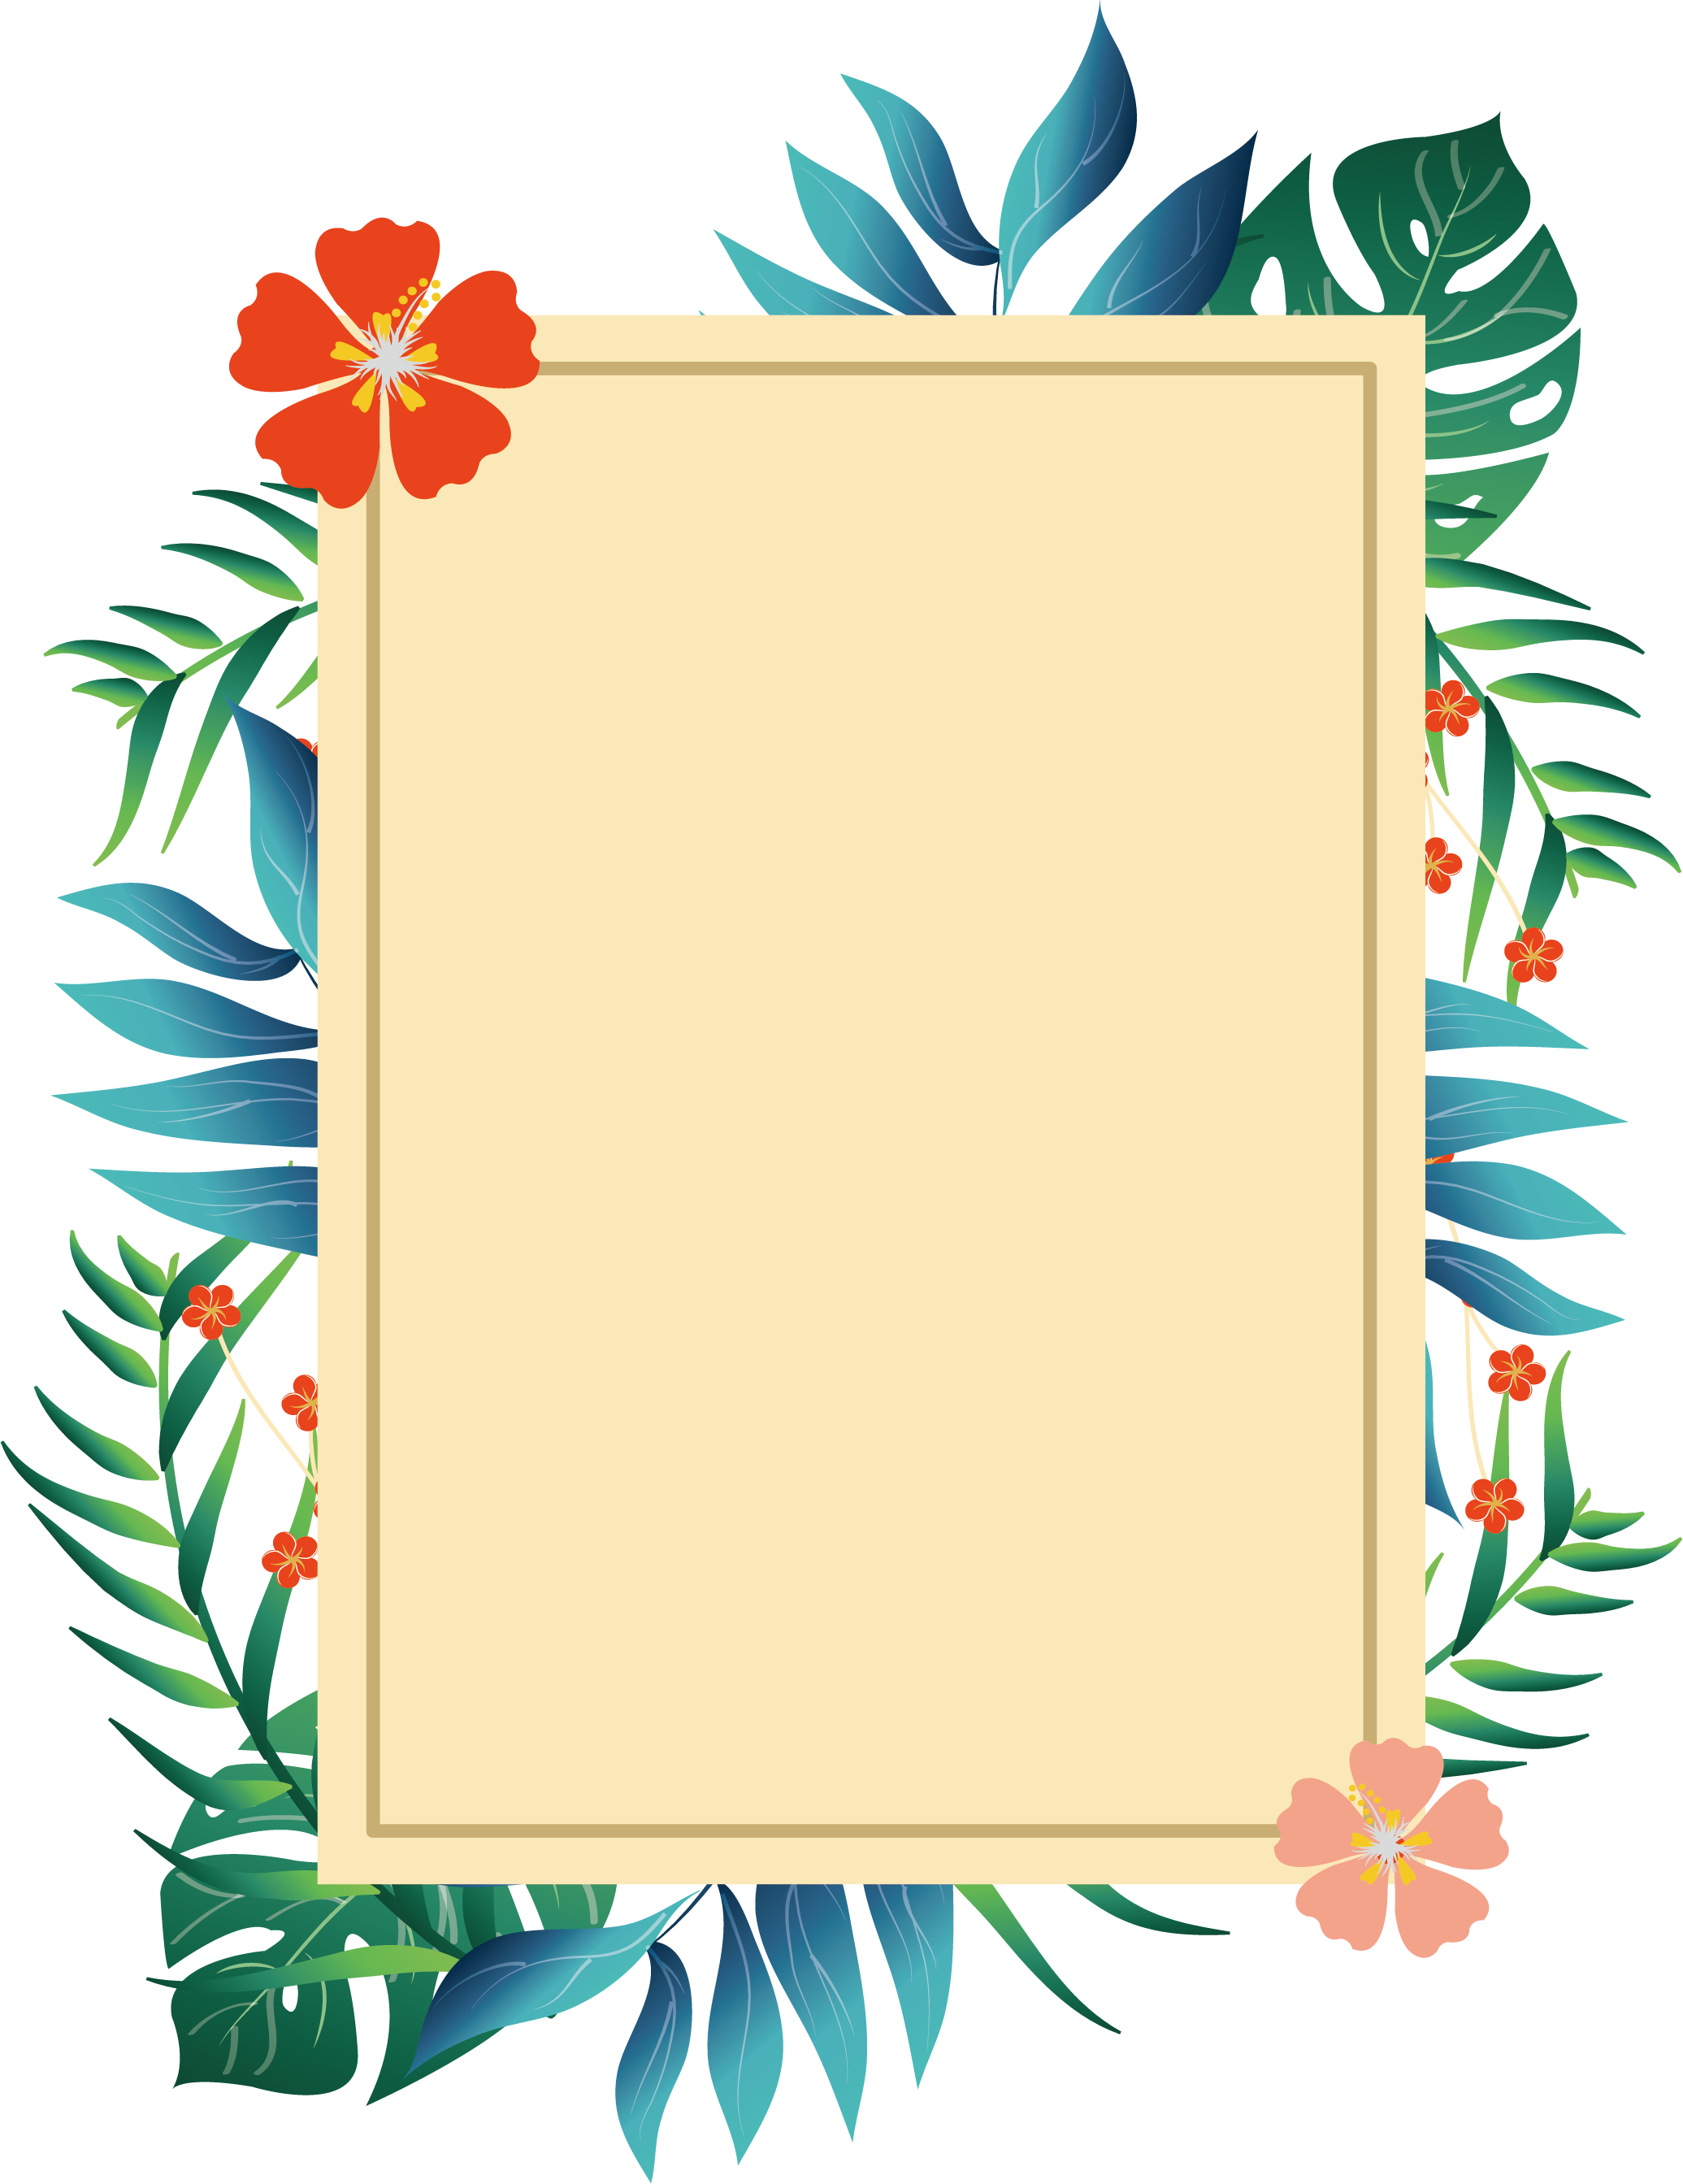 Download Picture Plant Romantic Summer Poster Frame Borders Clipart PNG Fre...